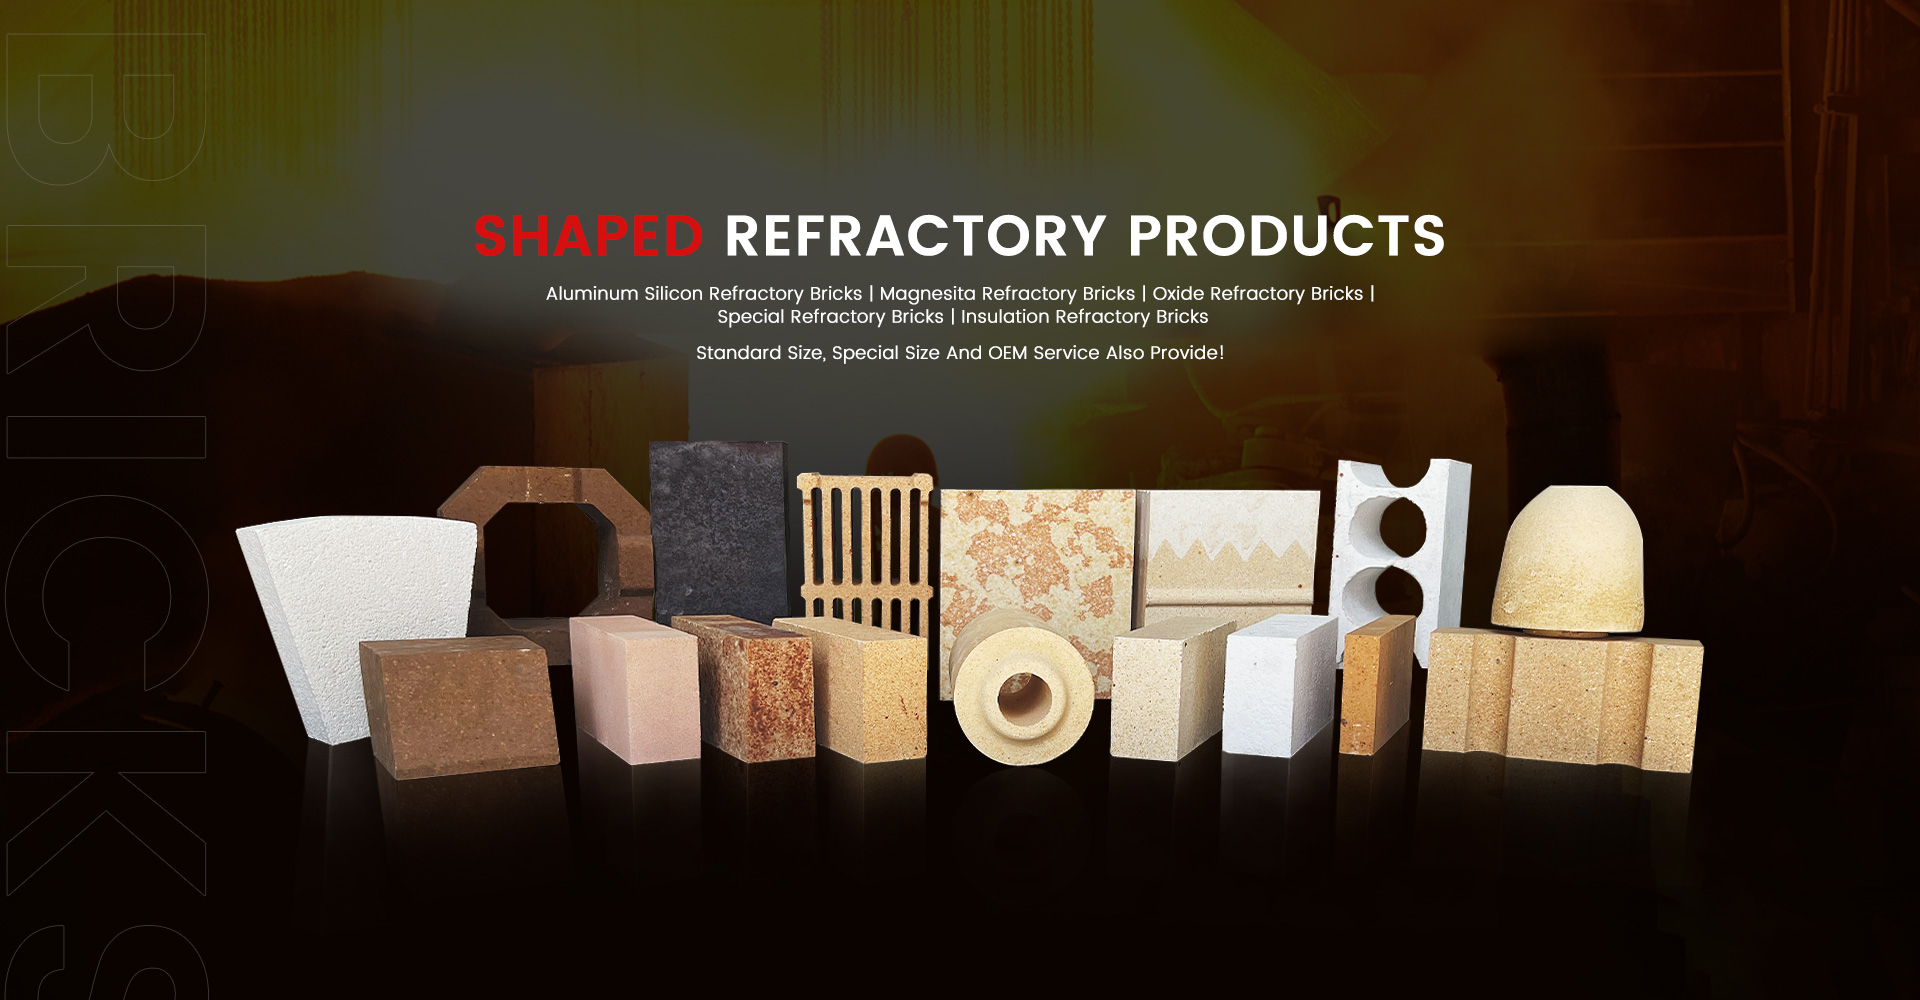 Shaped Refractory Products